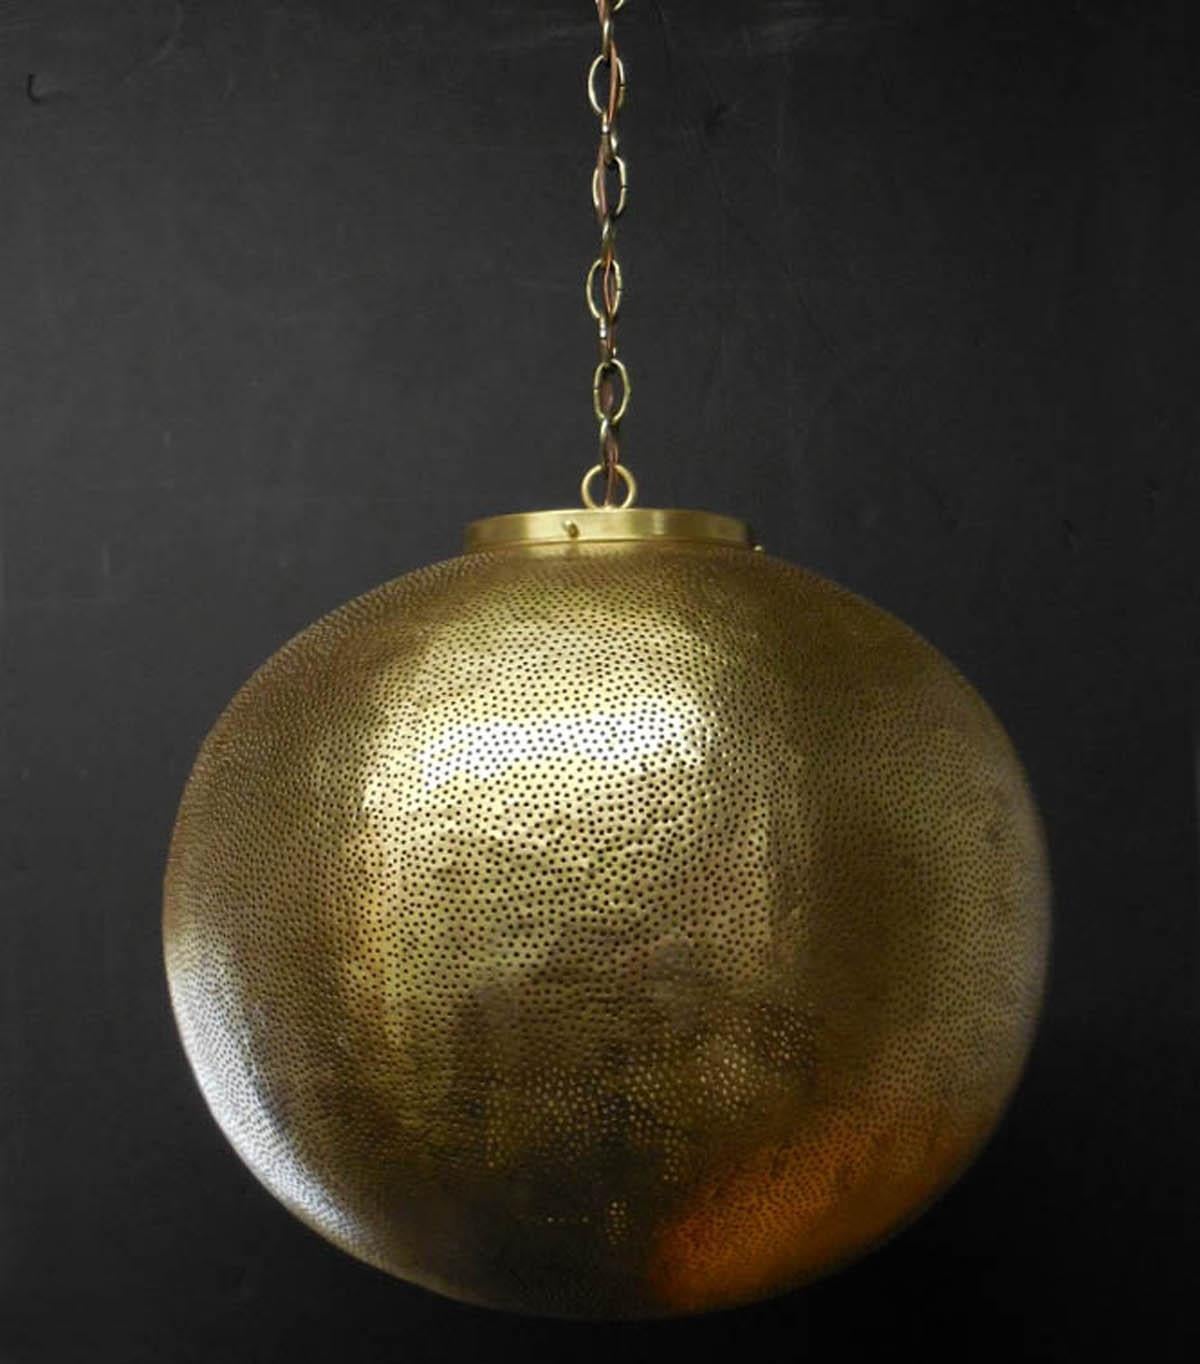 Large lantern, in hammered metal with hand finished matte bronze finish. Rewired in the US. Tiny circular cut outs. Three interior lights. Comes with chain in antique bronze finish. Ready for installation!